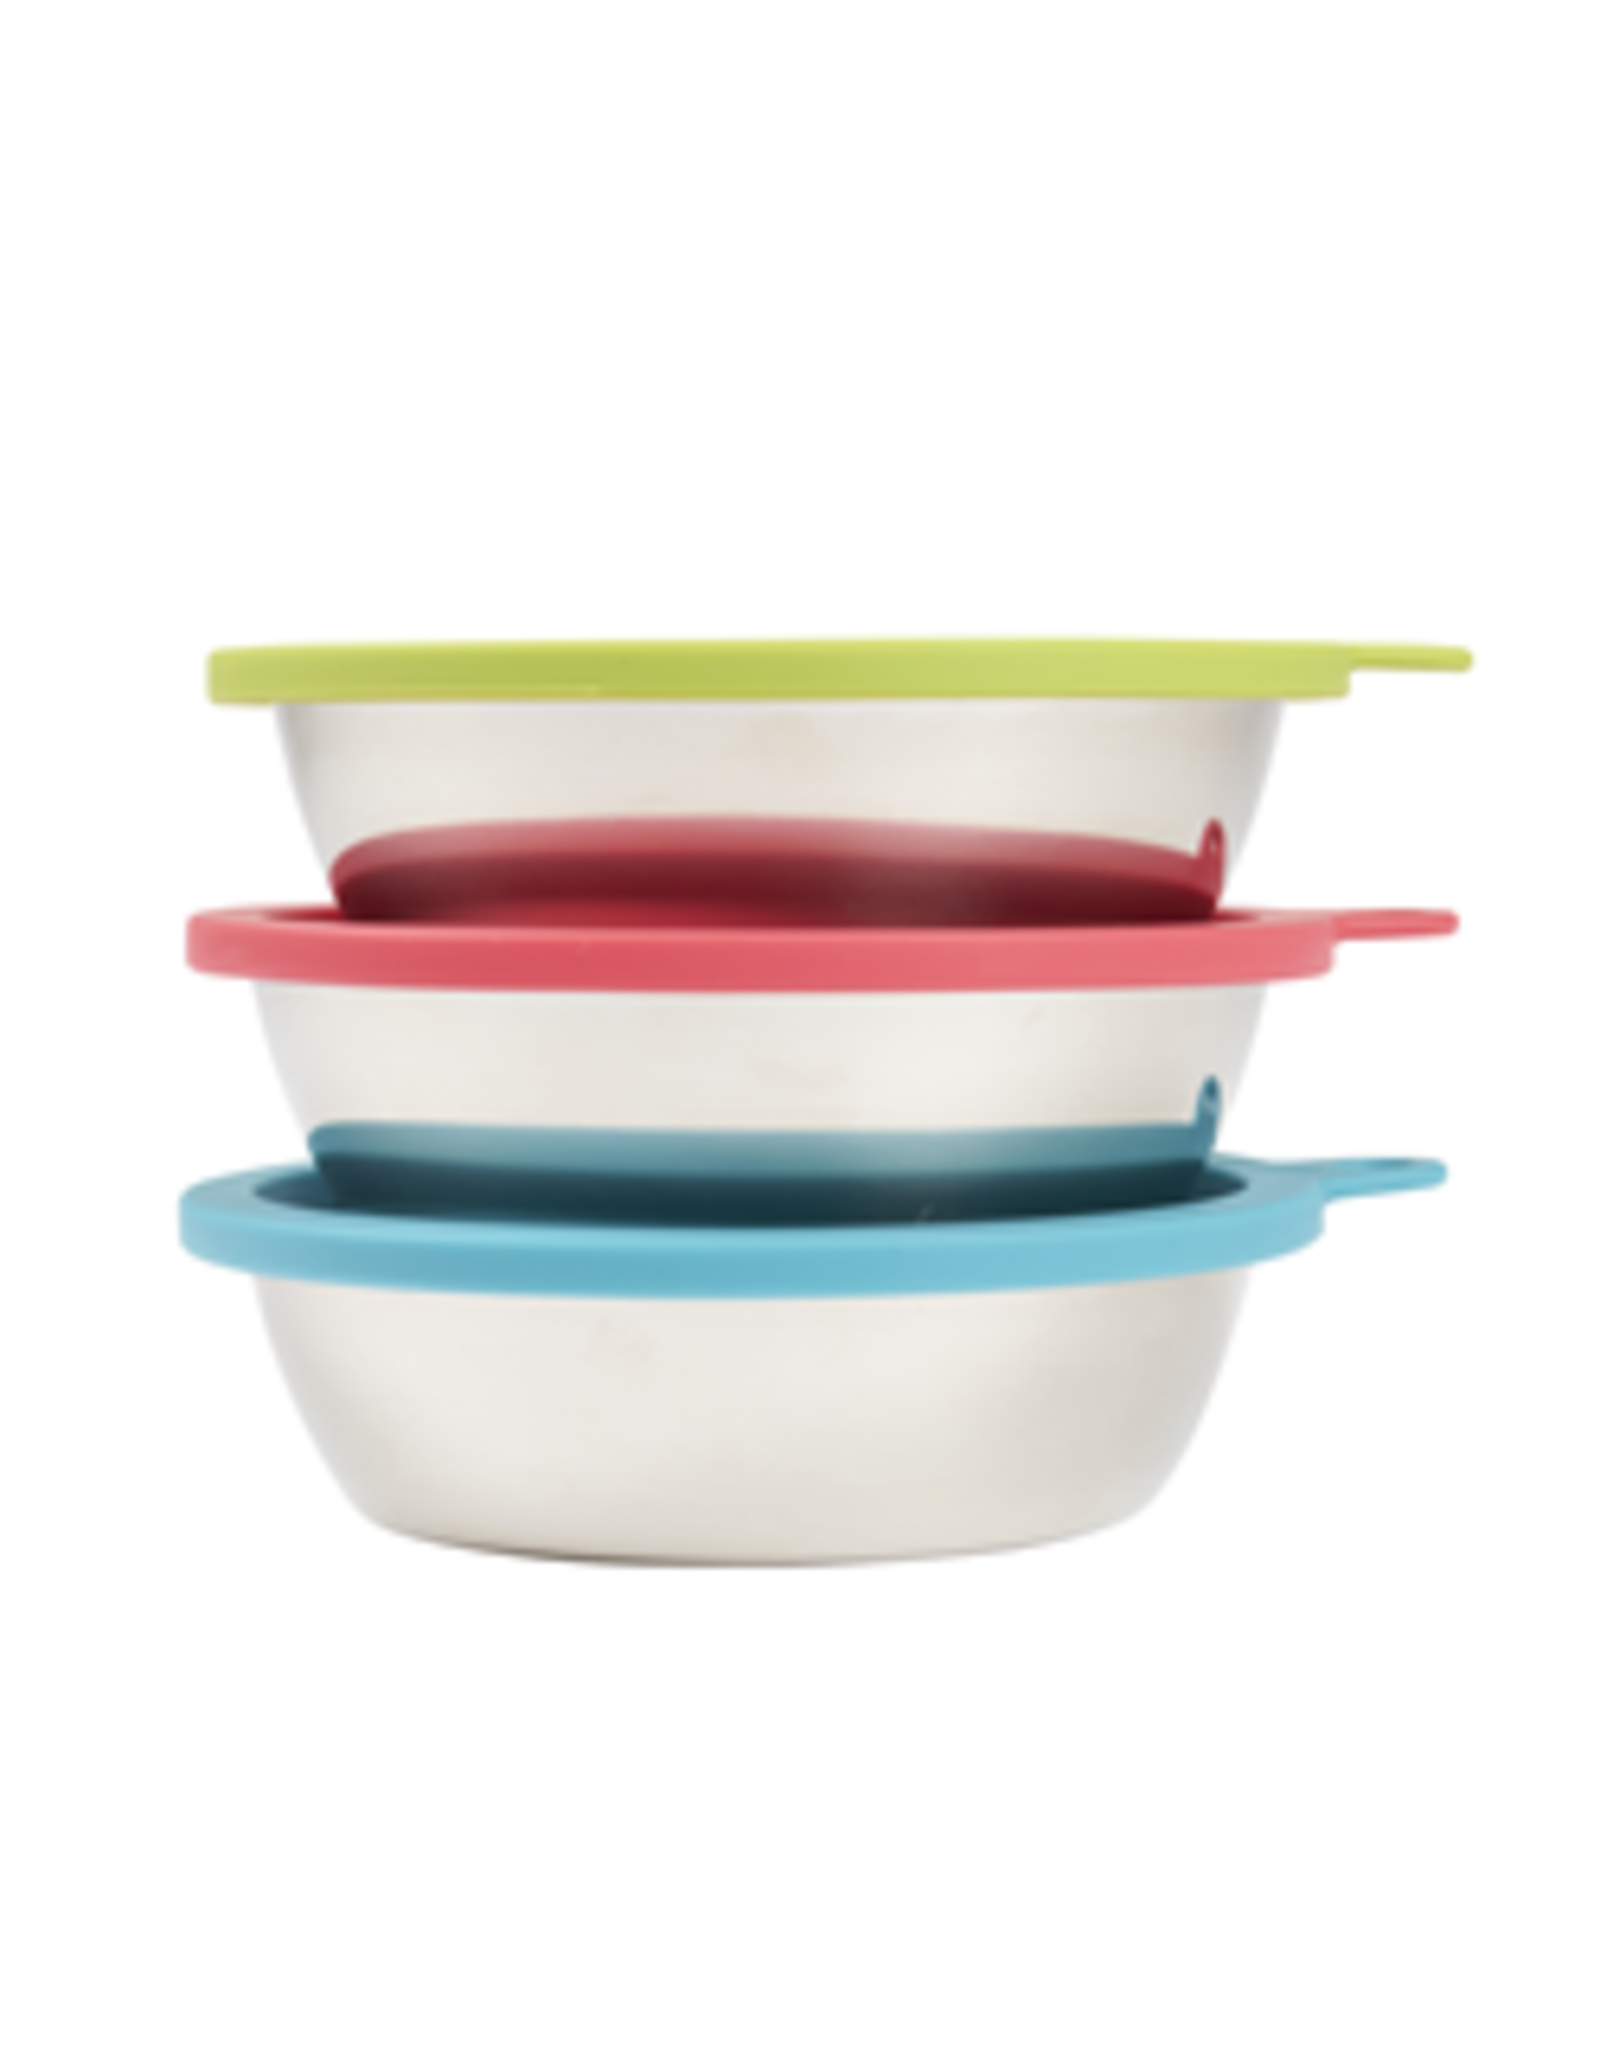 MessyMutts MessyMutts - 6pc Set - StainlessSaucerBowls w. Lids - MD Blue,Green,Watermelon